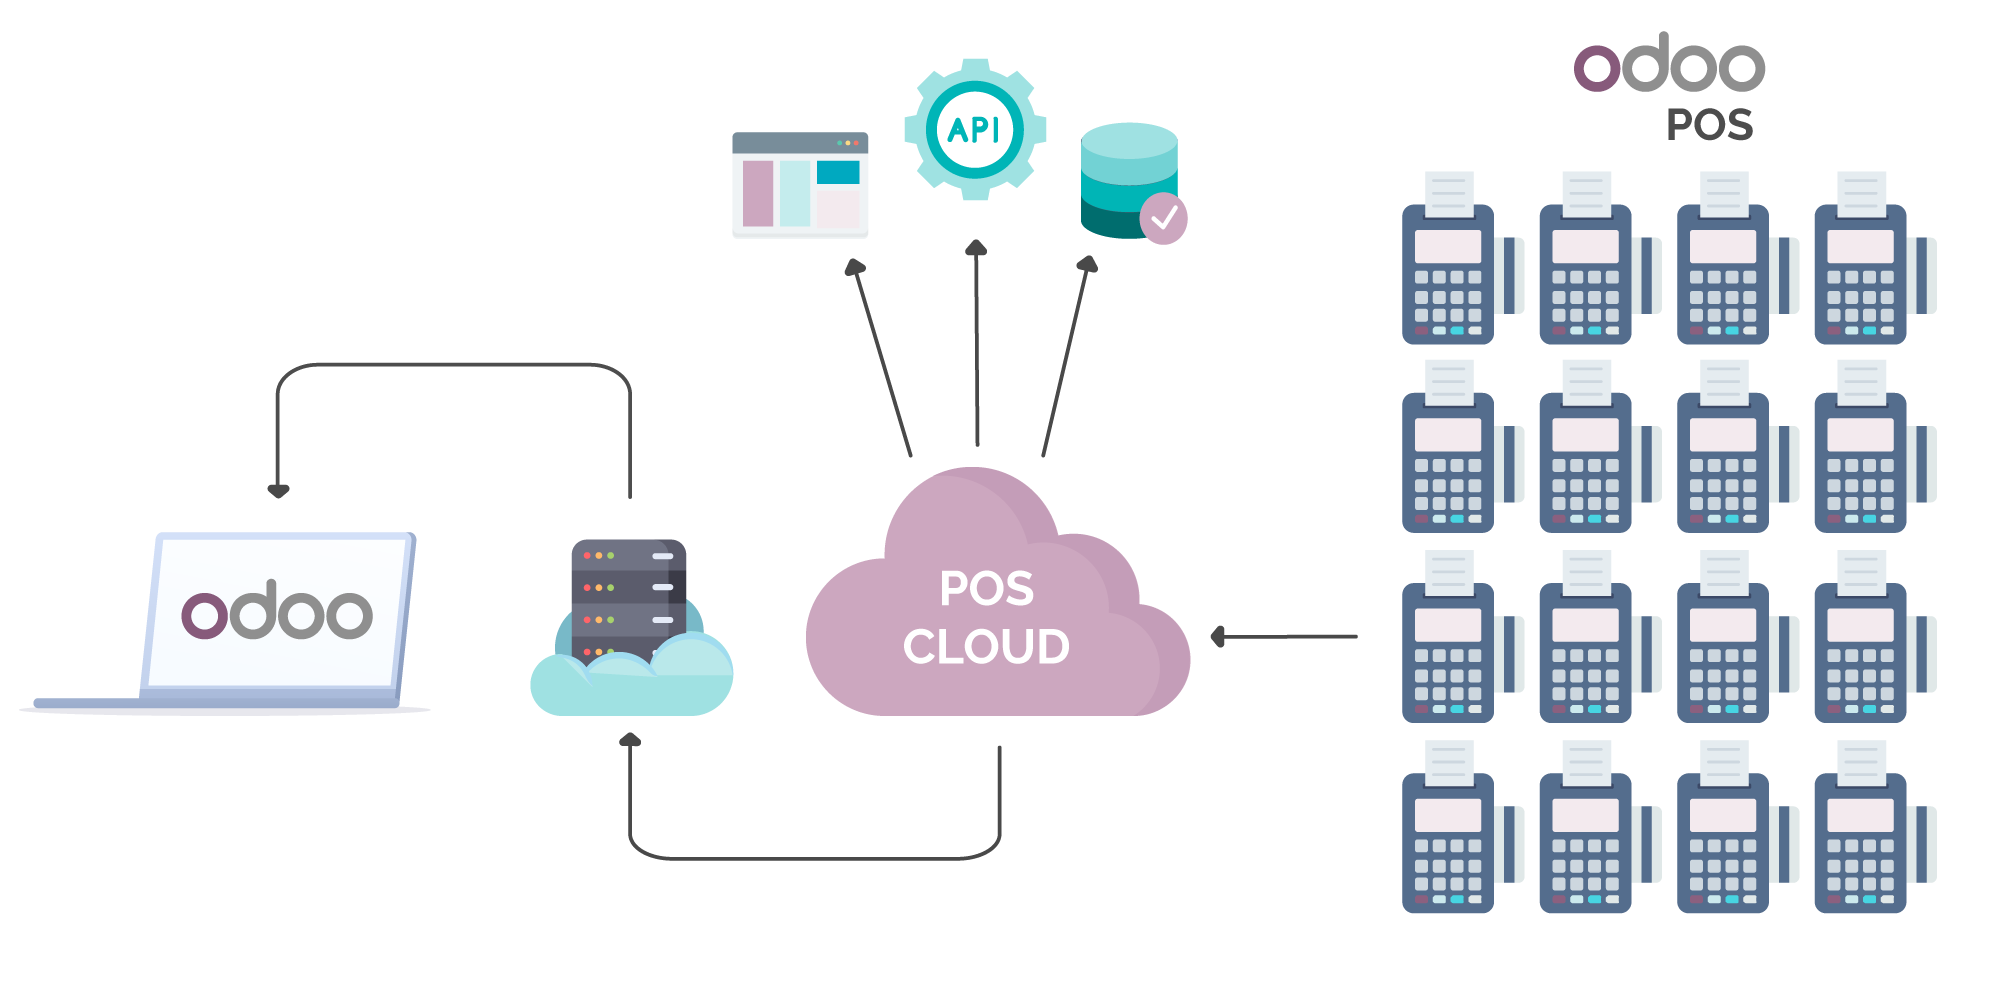 POS Cloud infrastructure